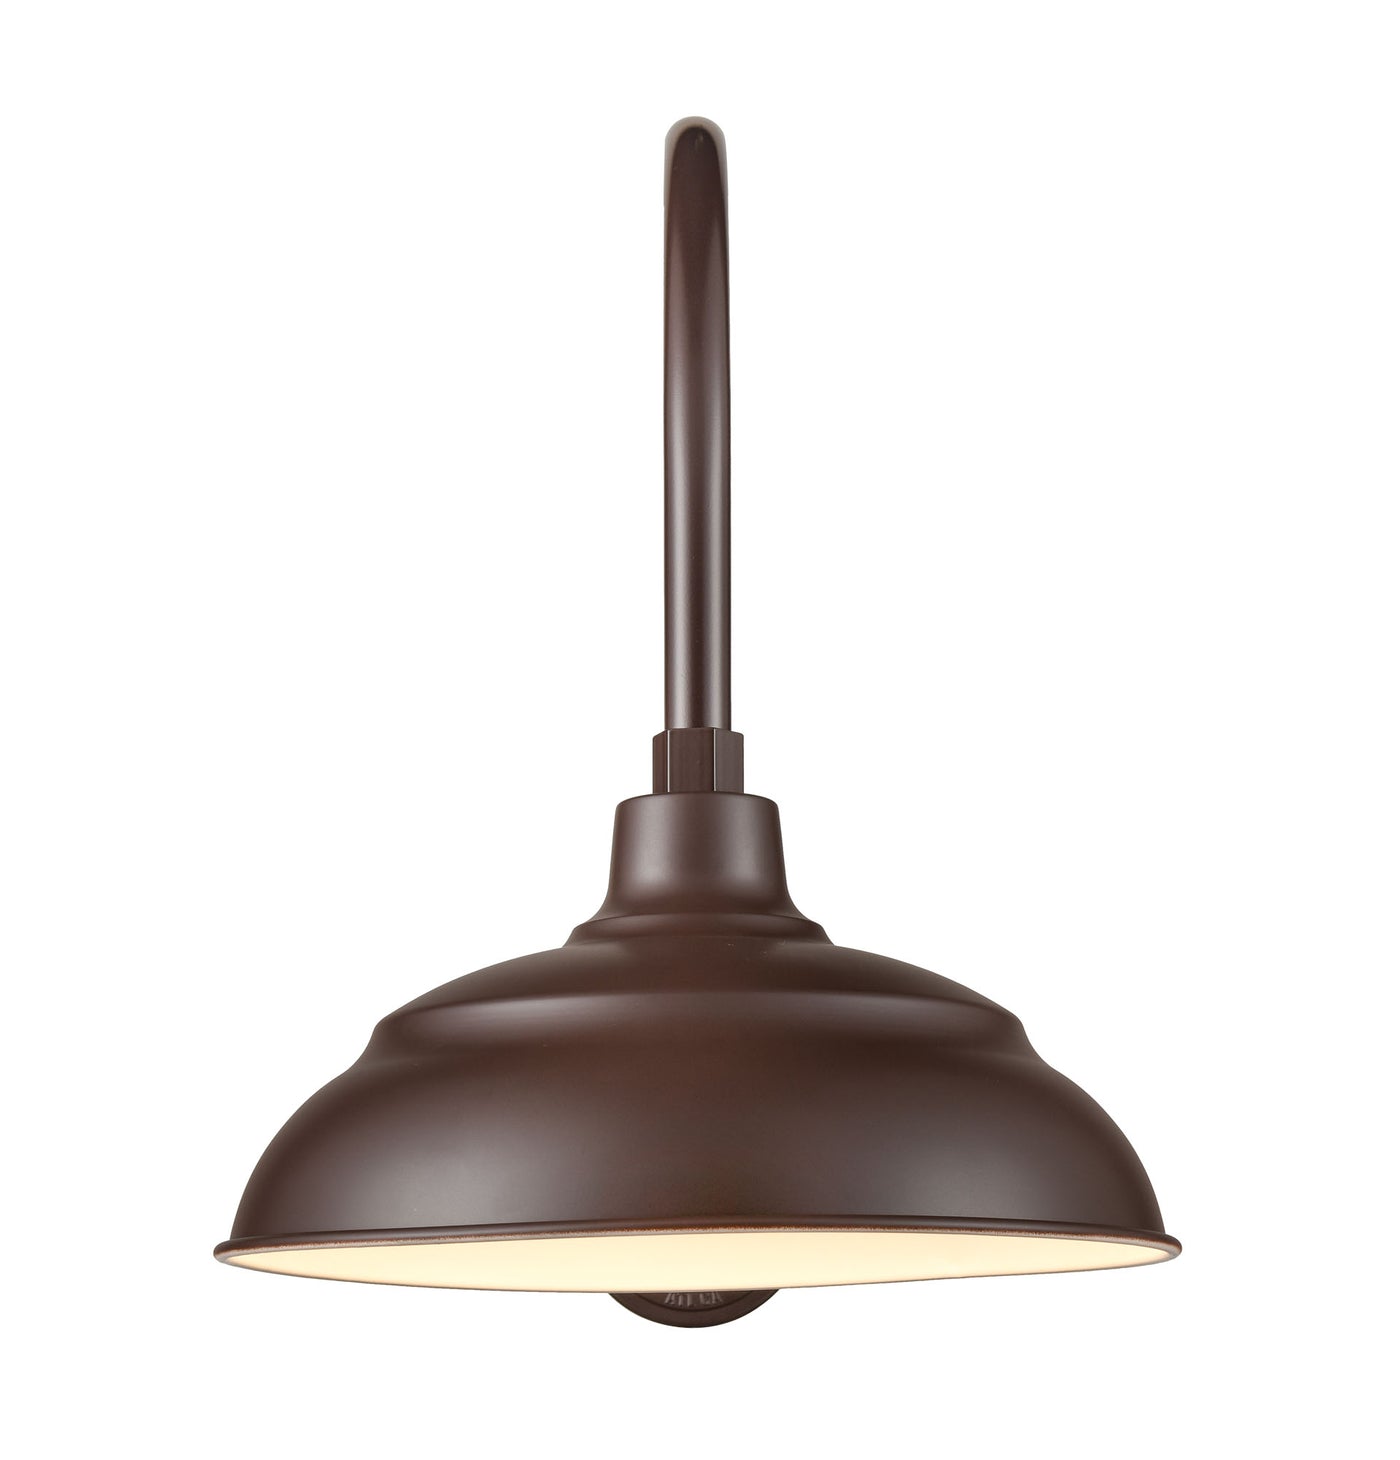 Millennium Lighting LED R Series Outdoor 14" RLM Warehouse Shade, Architectural Bronze